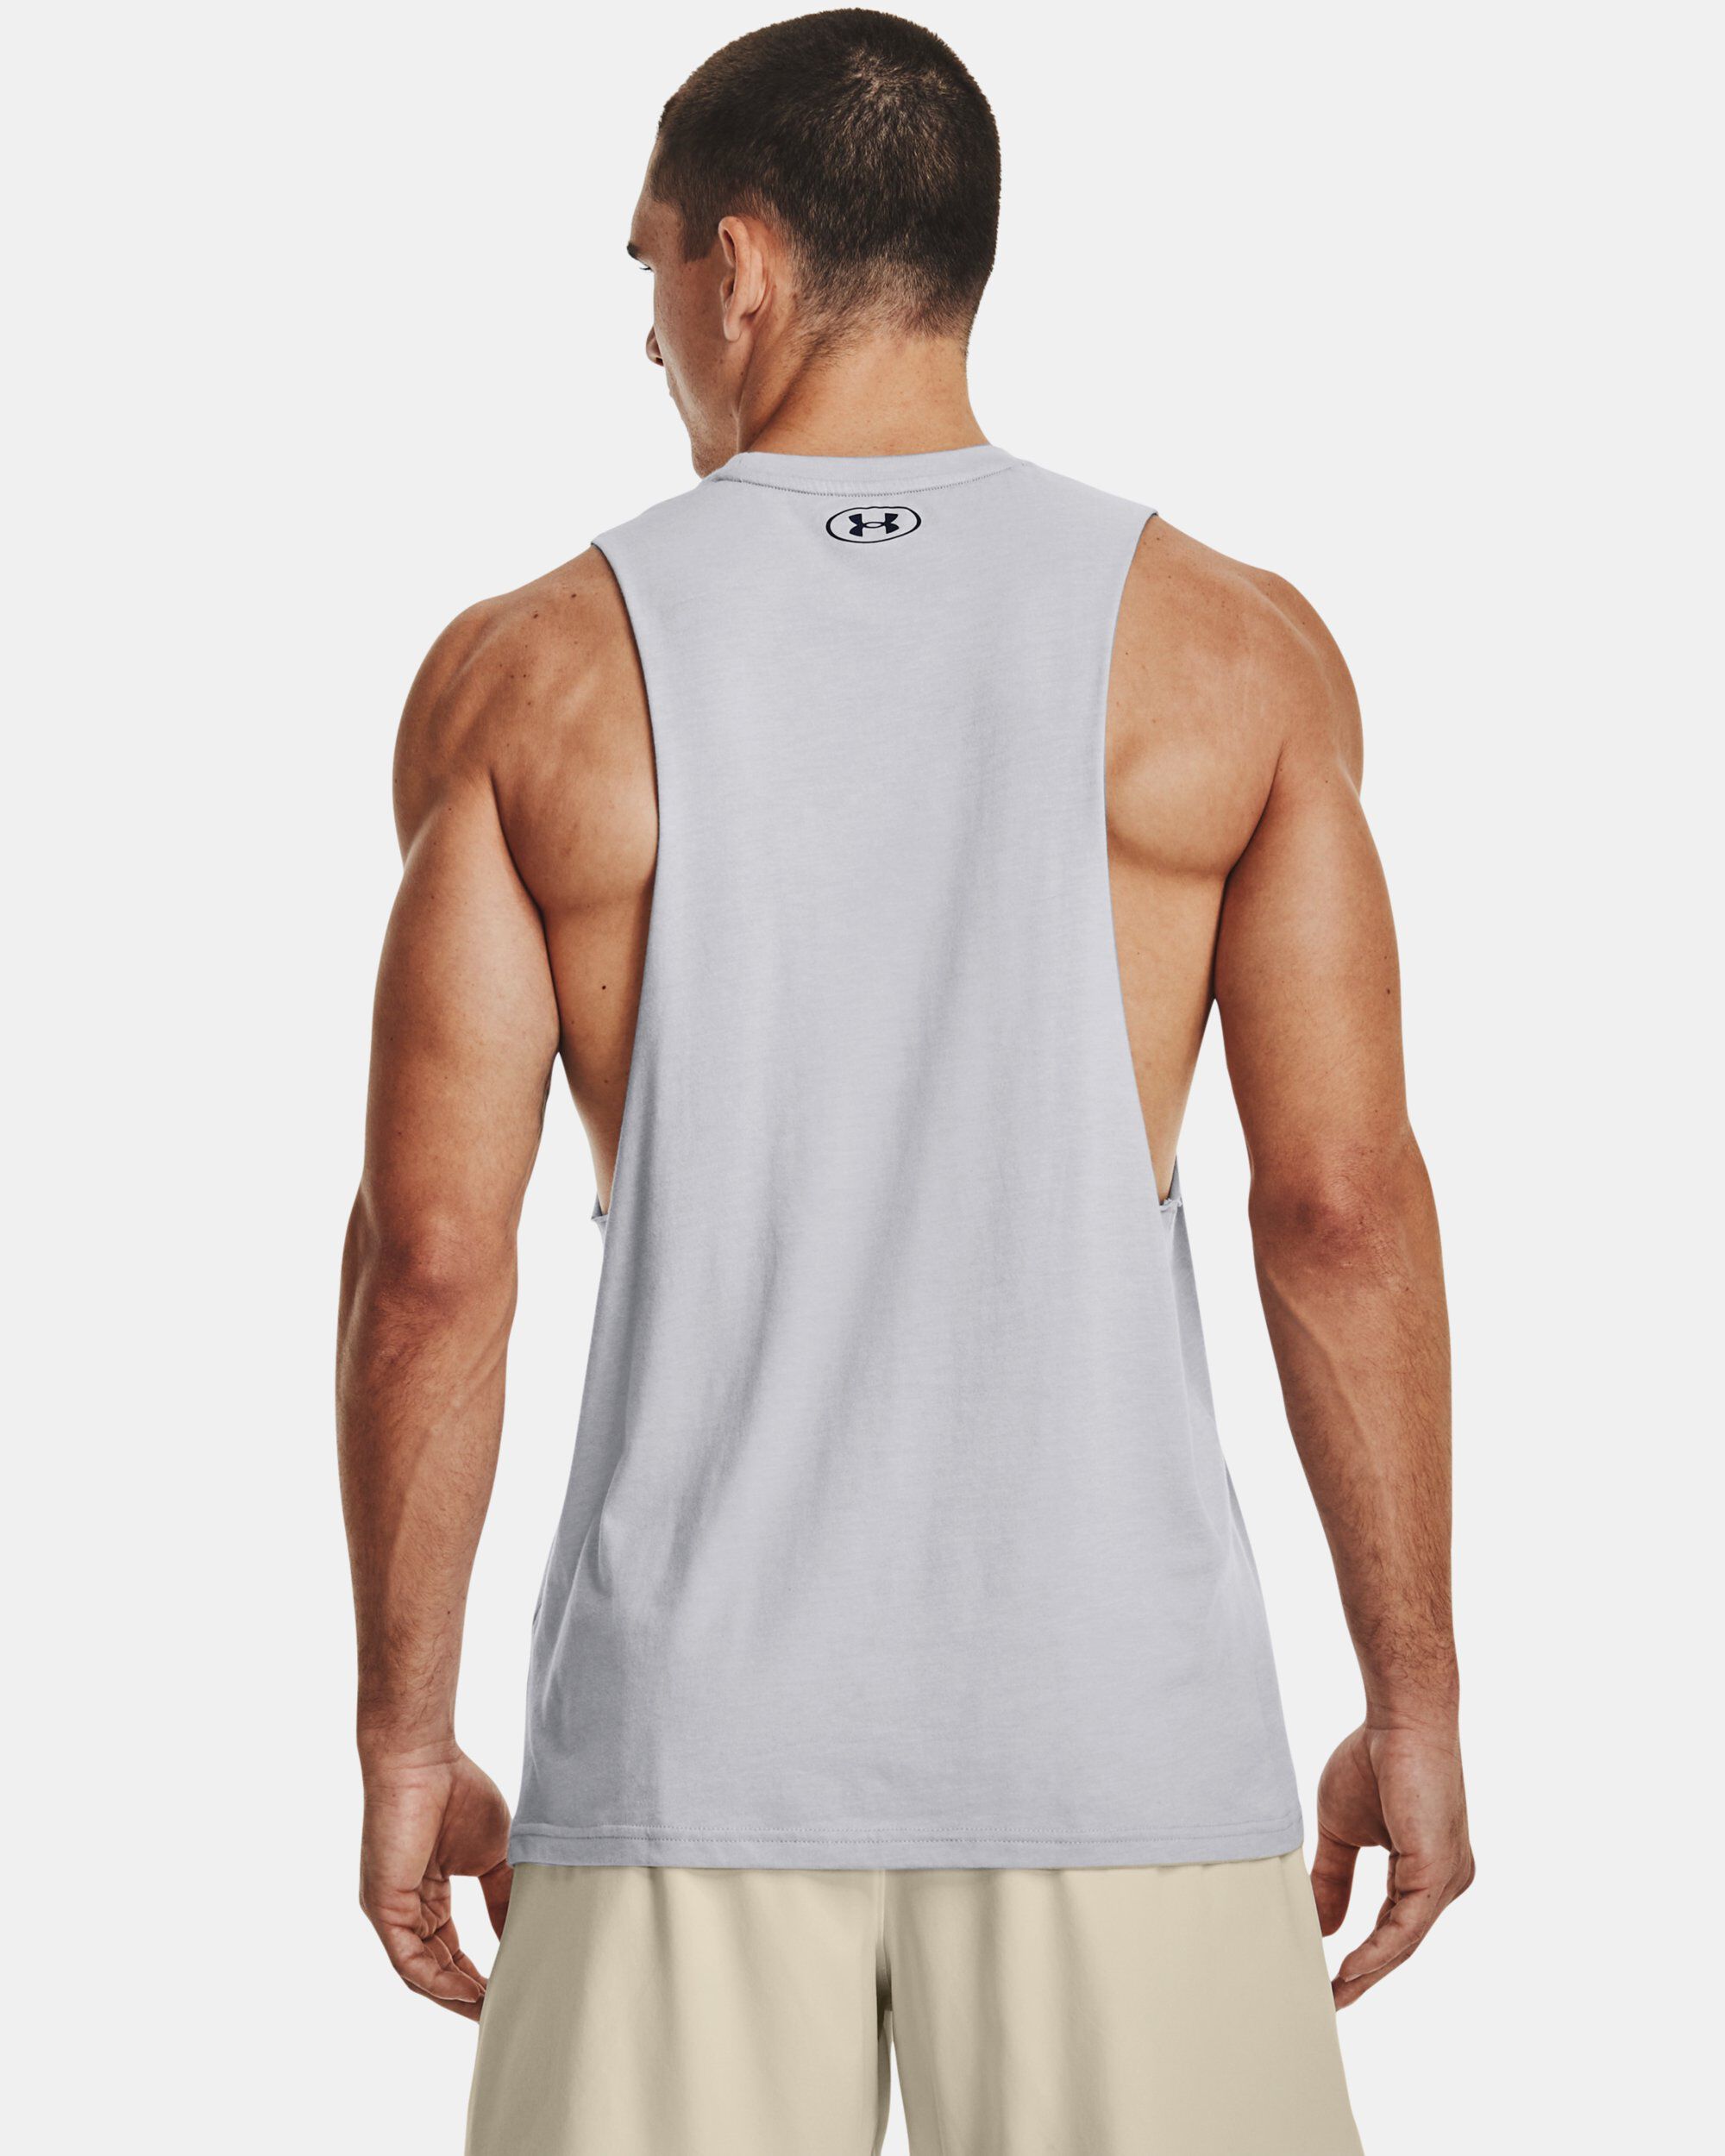 Project Rock Collections in Dubai, UAE | Buy Online | Under Armour